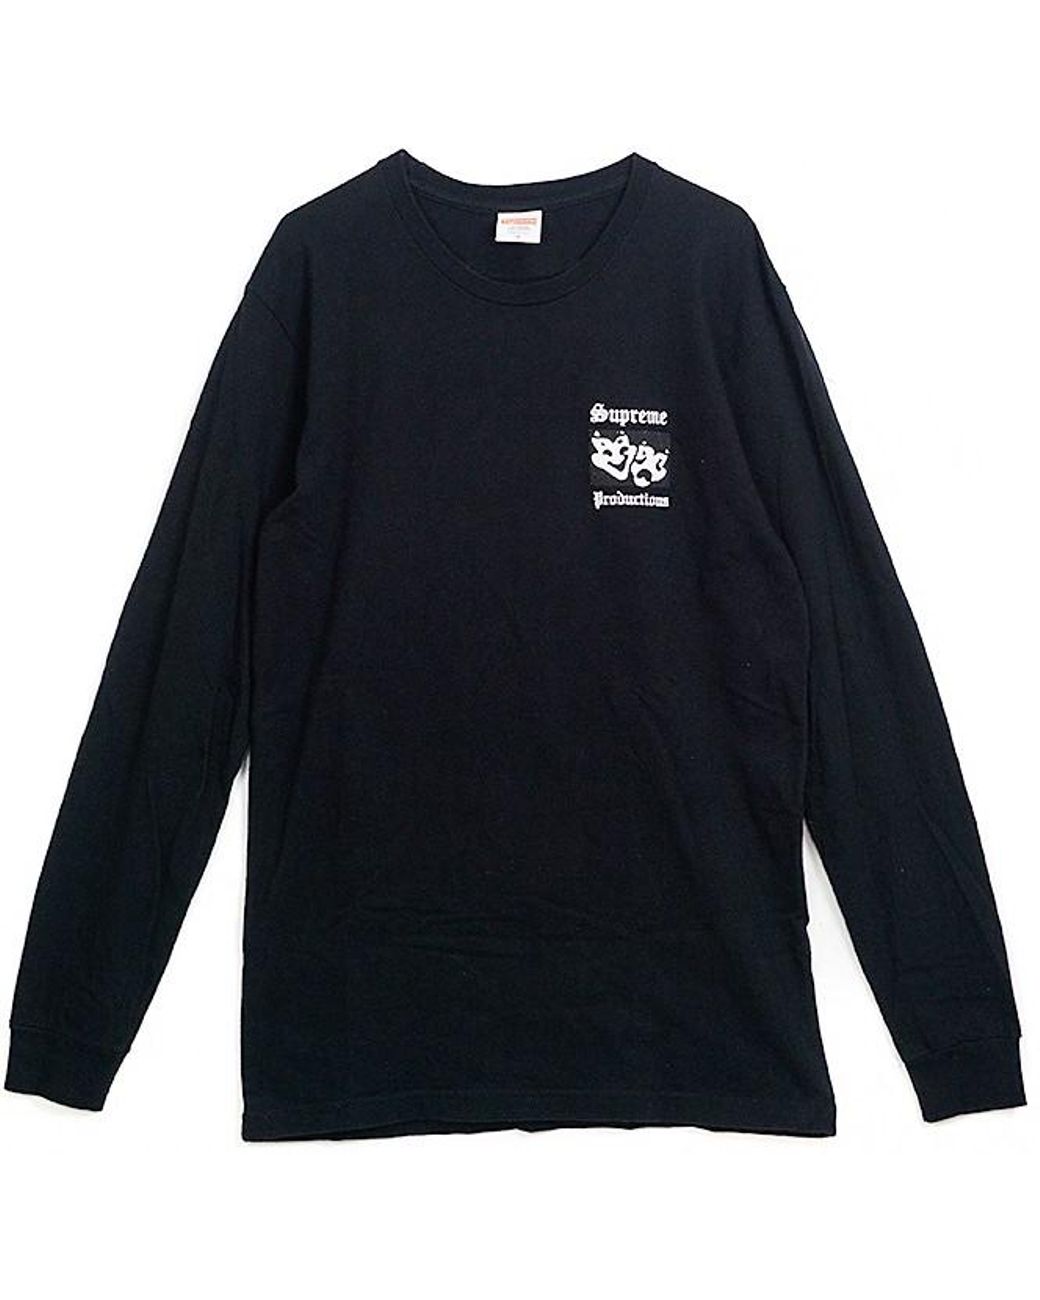 Lyst - Supreme Productions Long Sleeve Tee Black in Black for Men